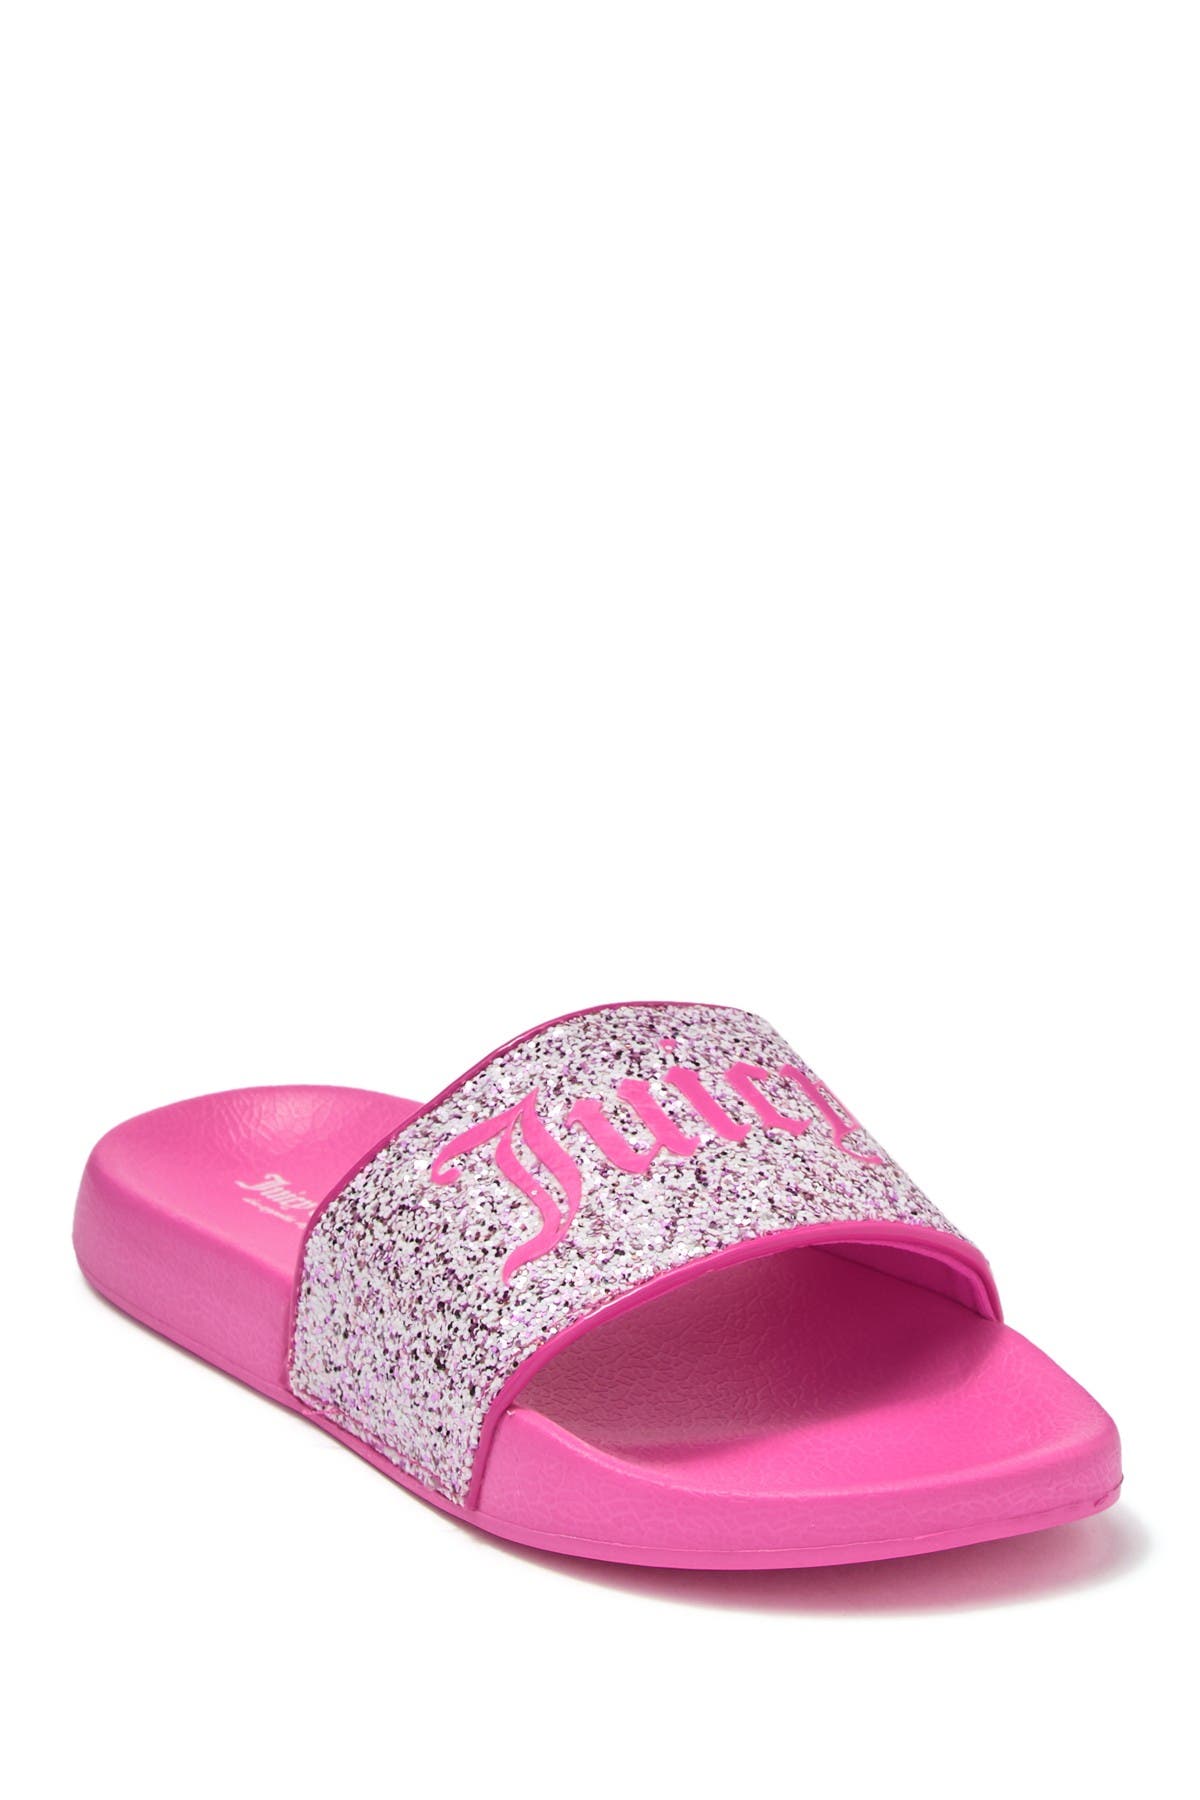 juicy couture slides pink